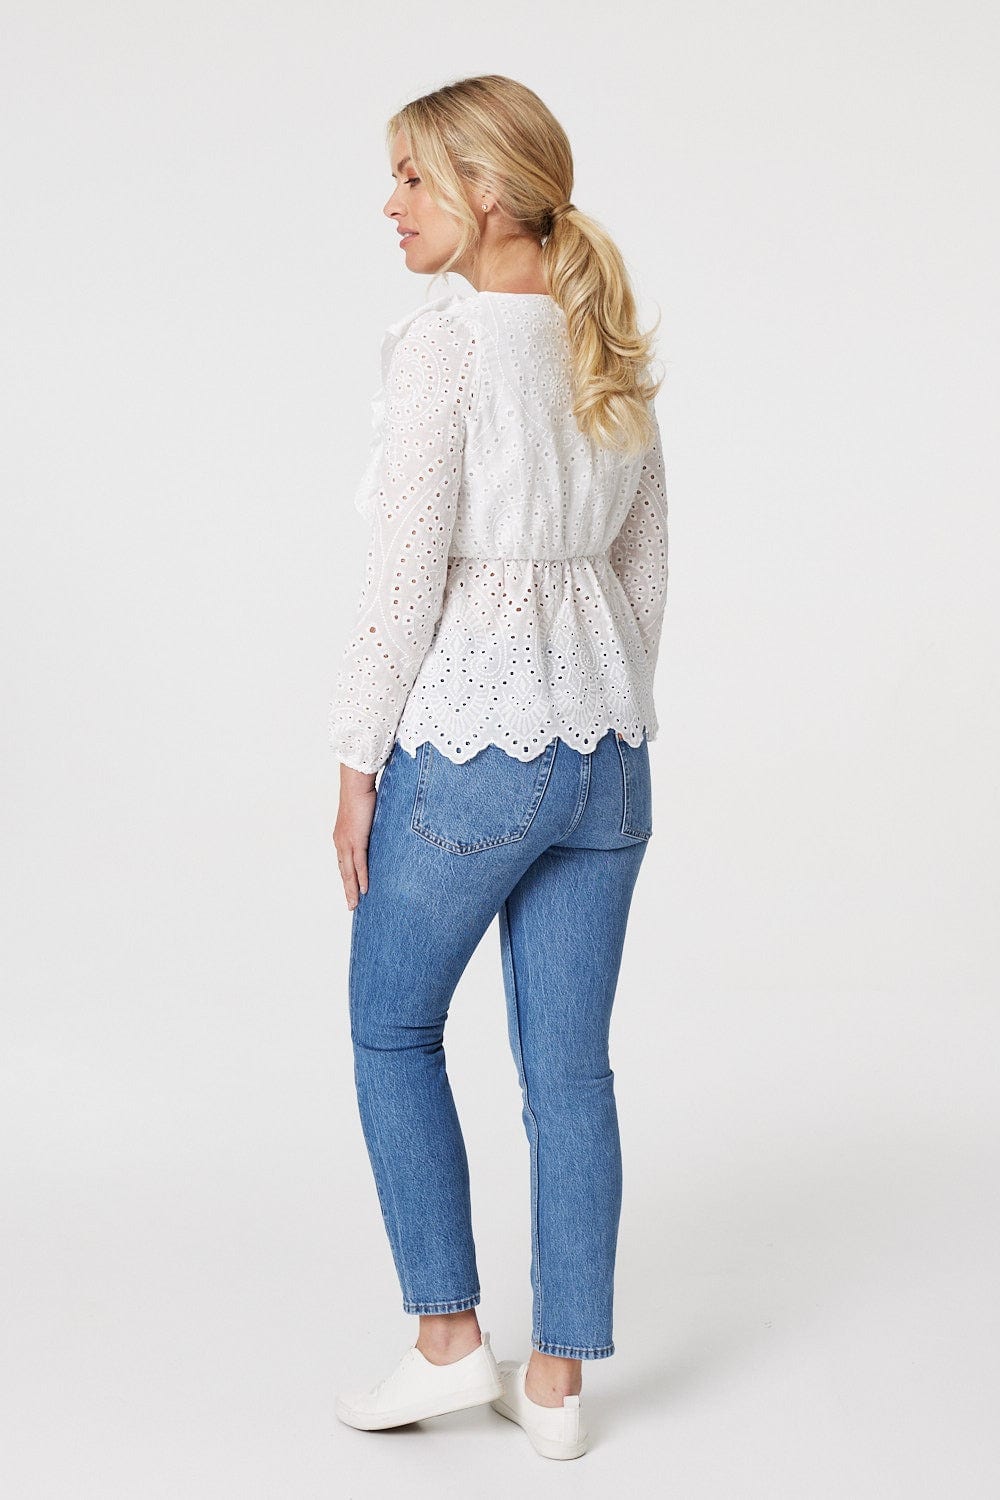 White | Broderie Anglaise Peplum Blouse